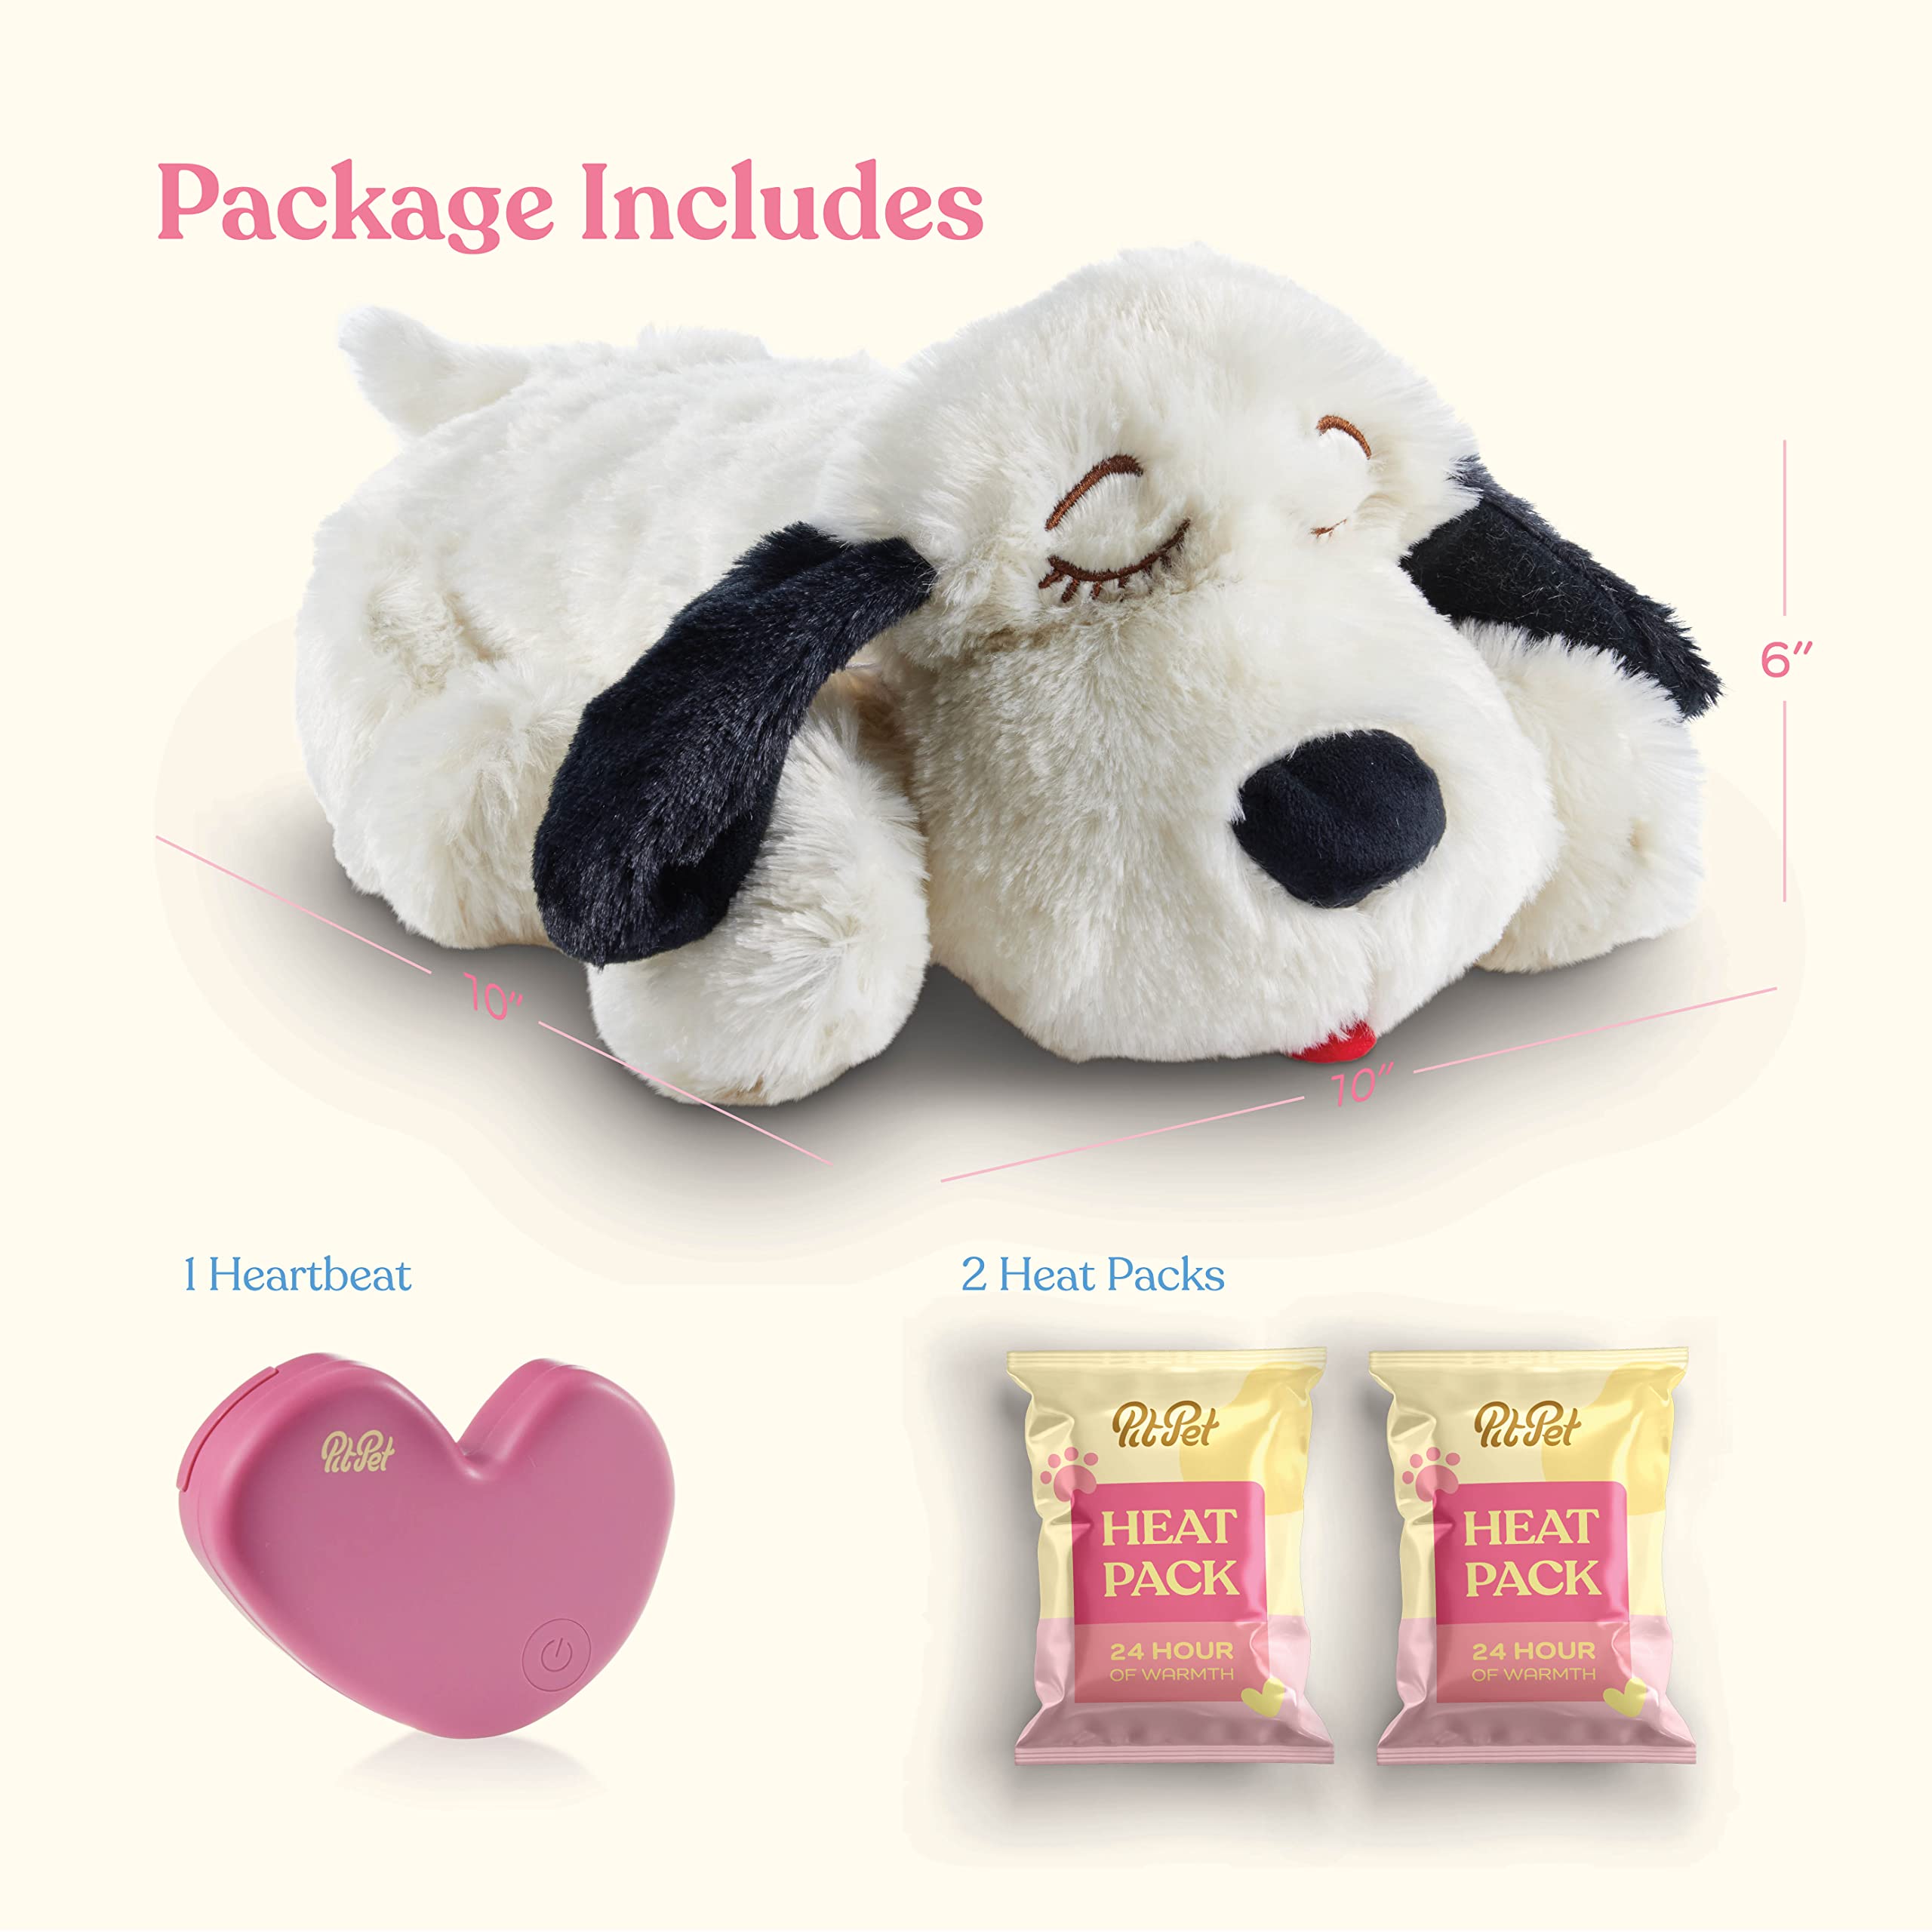 Heartbeat Plush Dog Toy - Actual feel Heartbeat Helps for Dog Anxiety Relief and Calming Aid - Stuffed Dog Toys With 2 Disposable Heat Packs - Comfort Toy for Puppy Dogs Cats Pets -Plush Toys for Dogs  - Like New